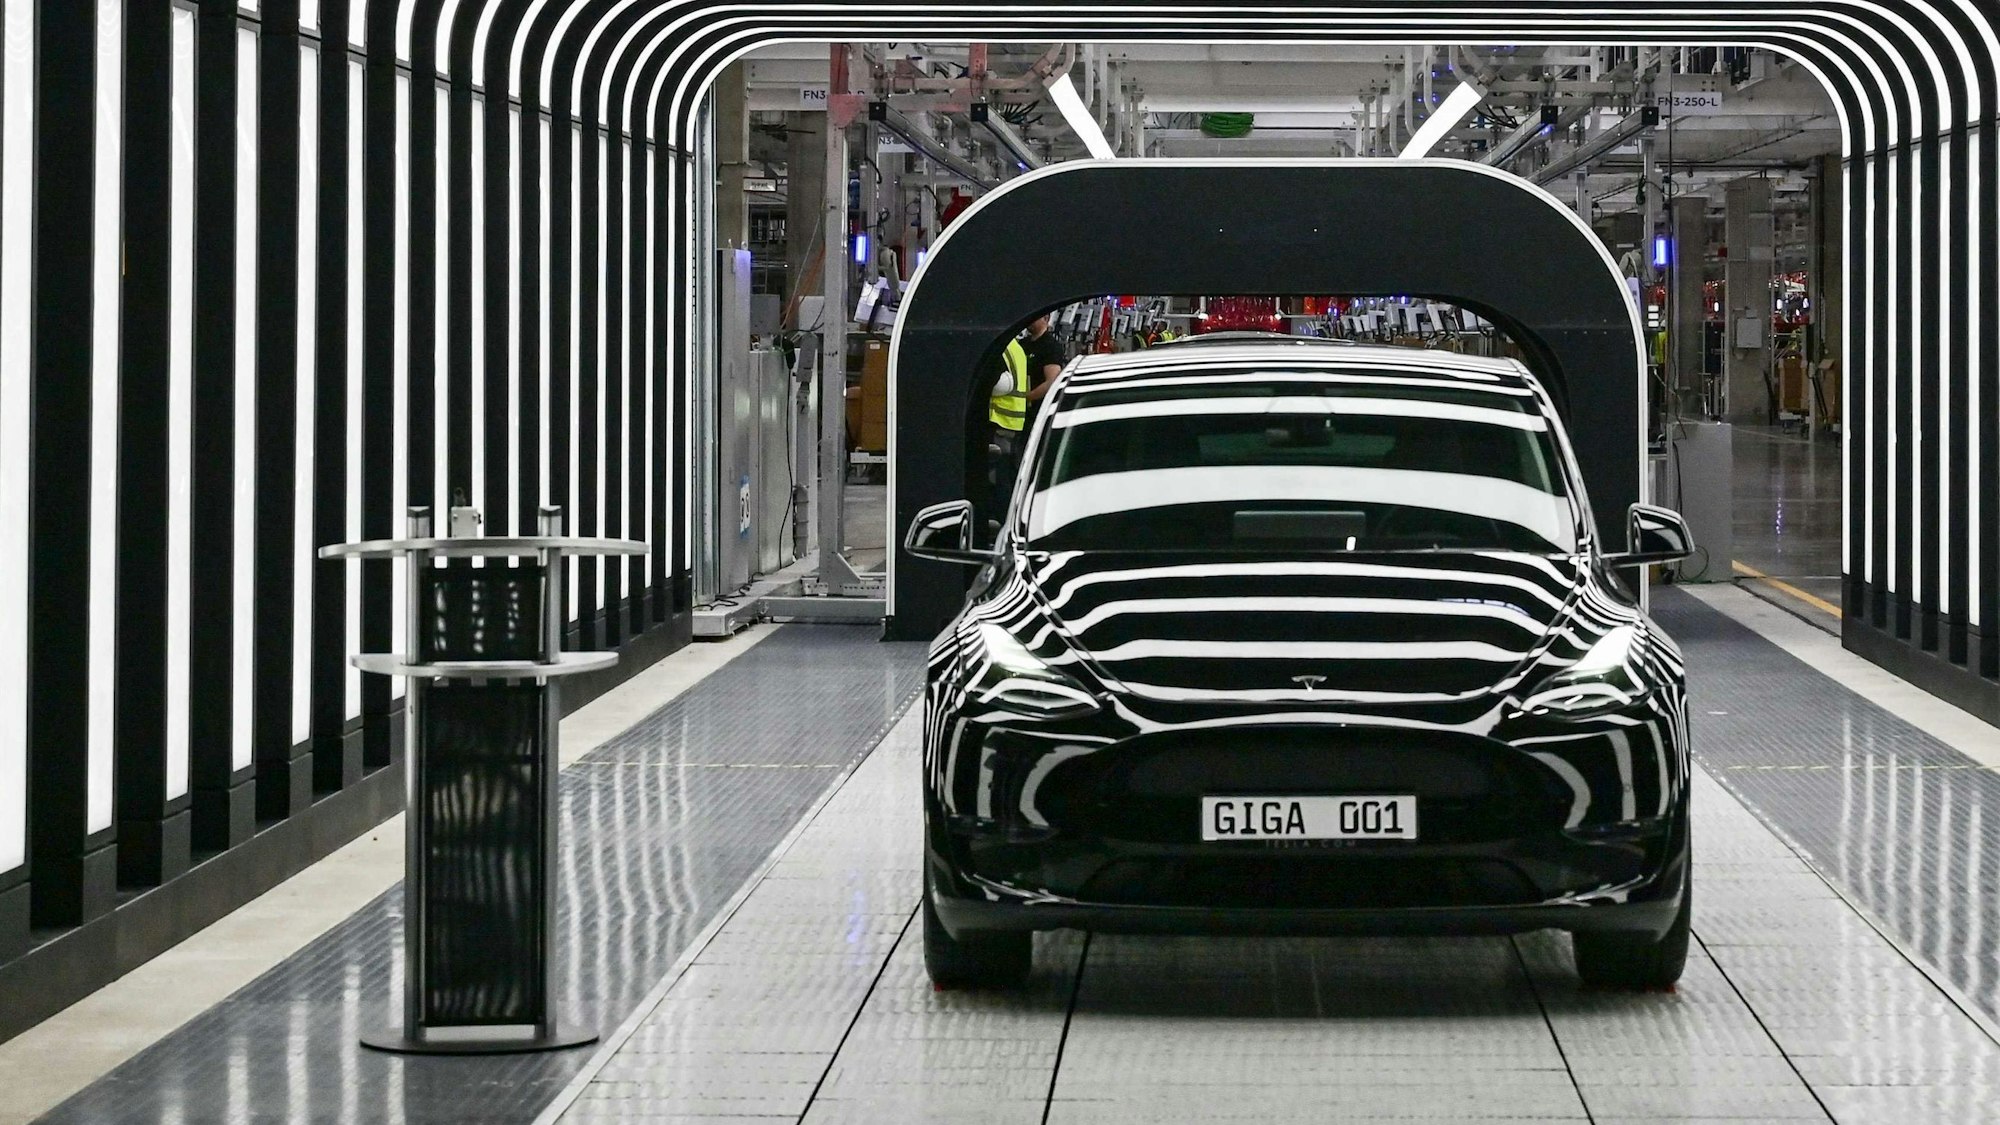 (FILES) In this file photo taken on March 22, 2022, an electric vehicle of the model Y is pictured during the start of the production at Tesla's "Gigafactory" in Gruenheide, southeast of Berlin. - Tesla reported another round of record quarterly profits on January 25, 2023, while confirming its long-term production outlook in spite of concerns about rising competition and macroeconomic headwinds. (Photo by Patrick Pleul / POOL / AFP)